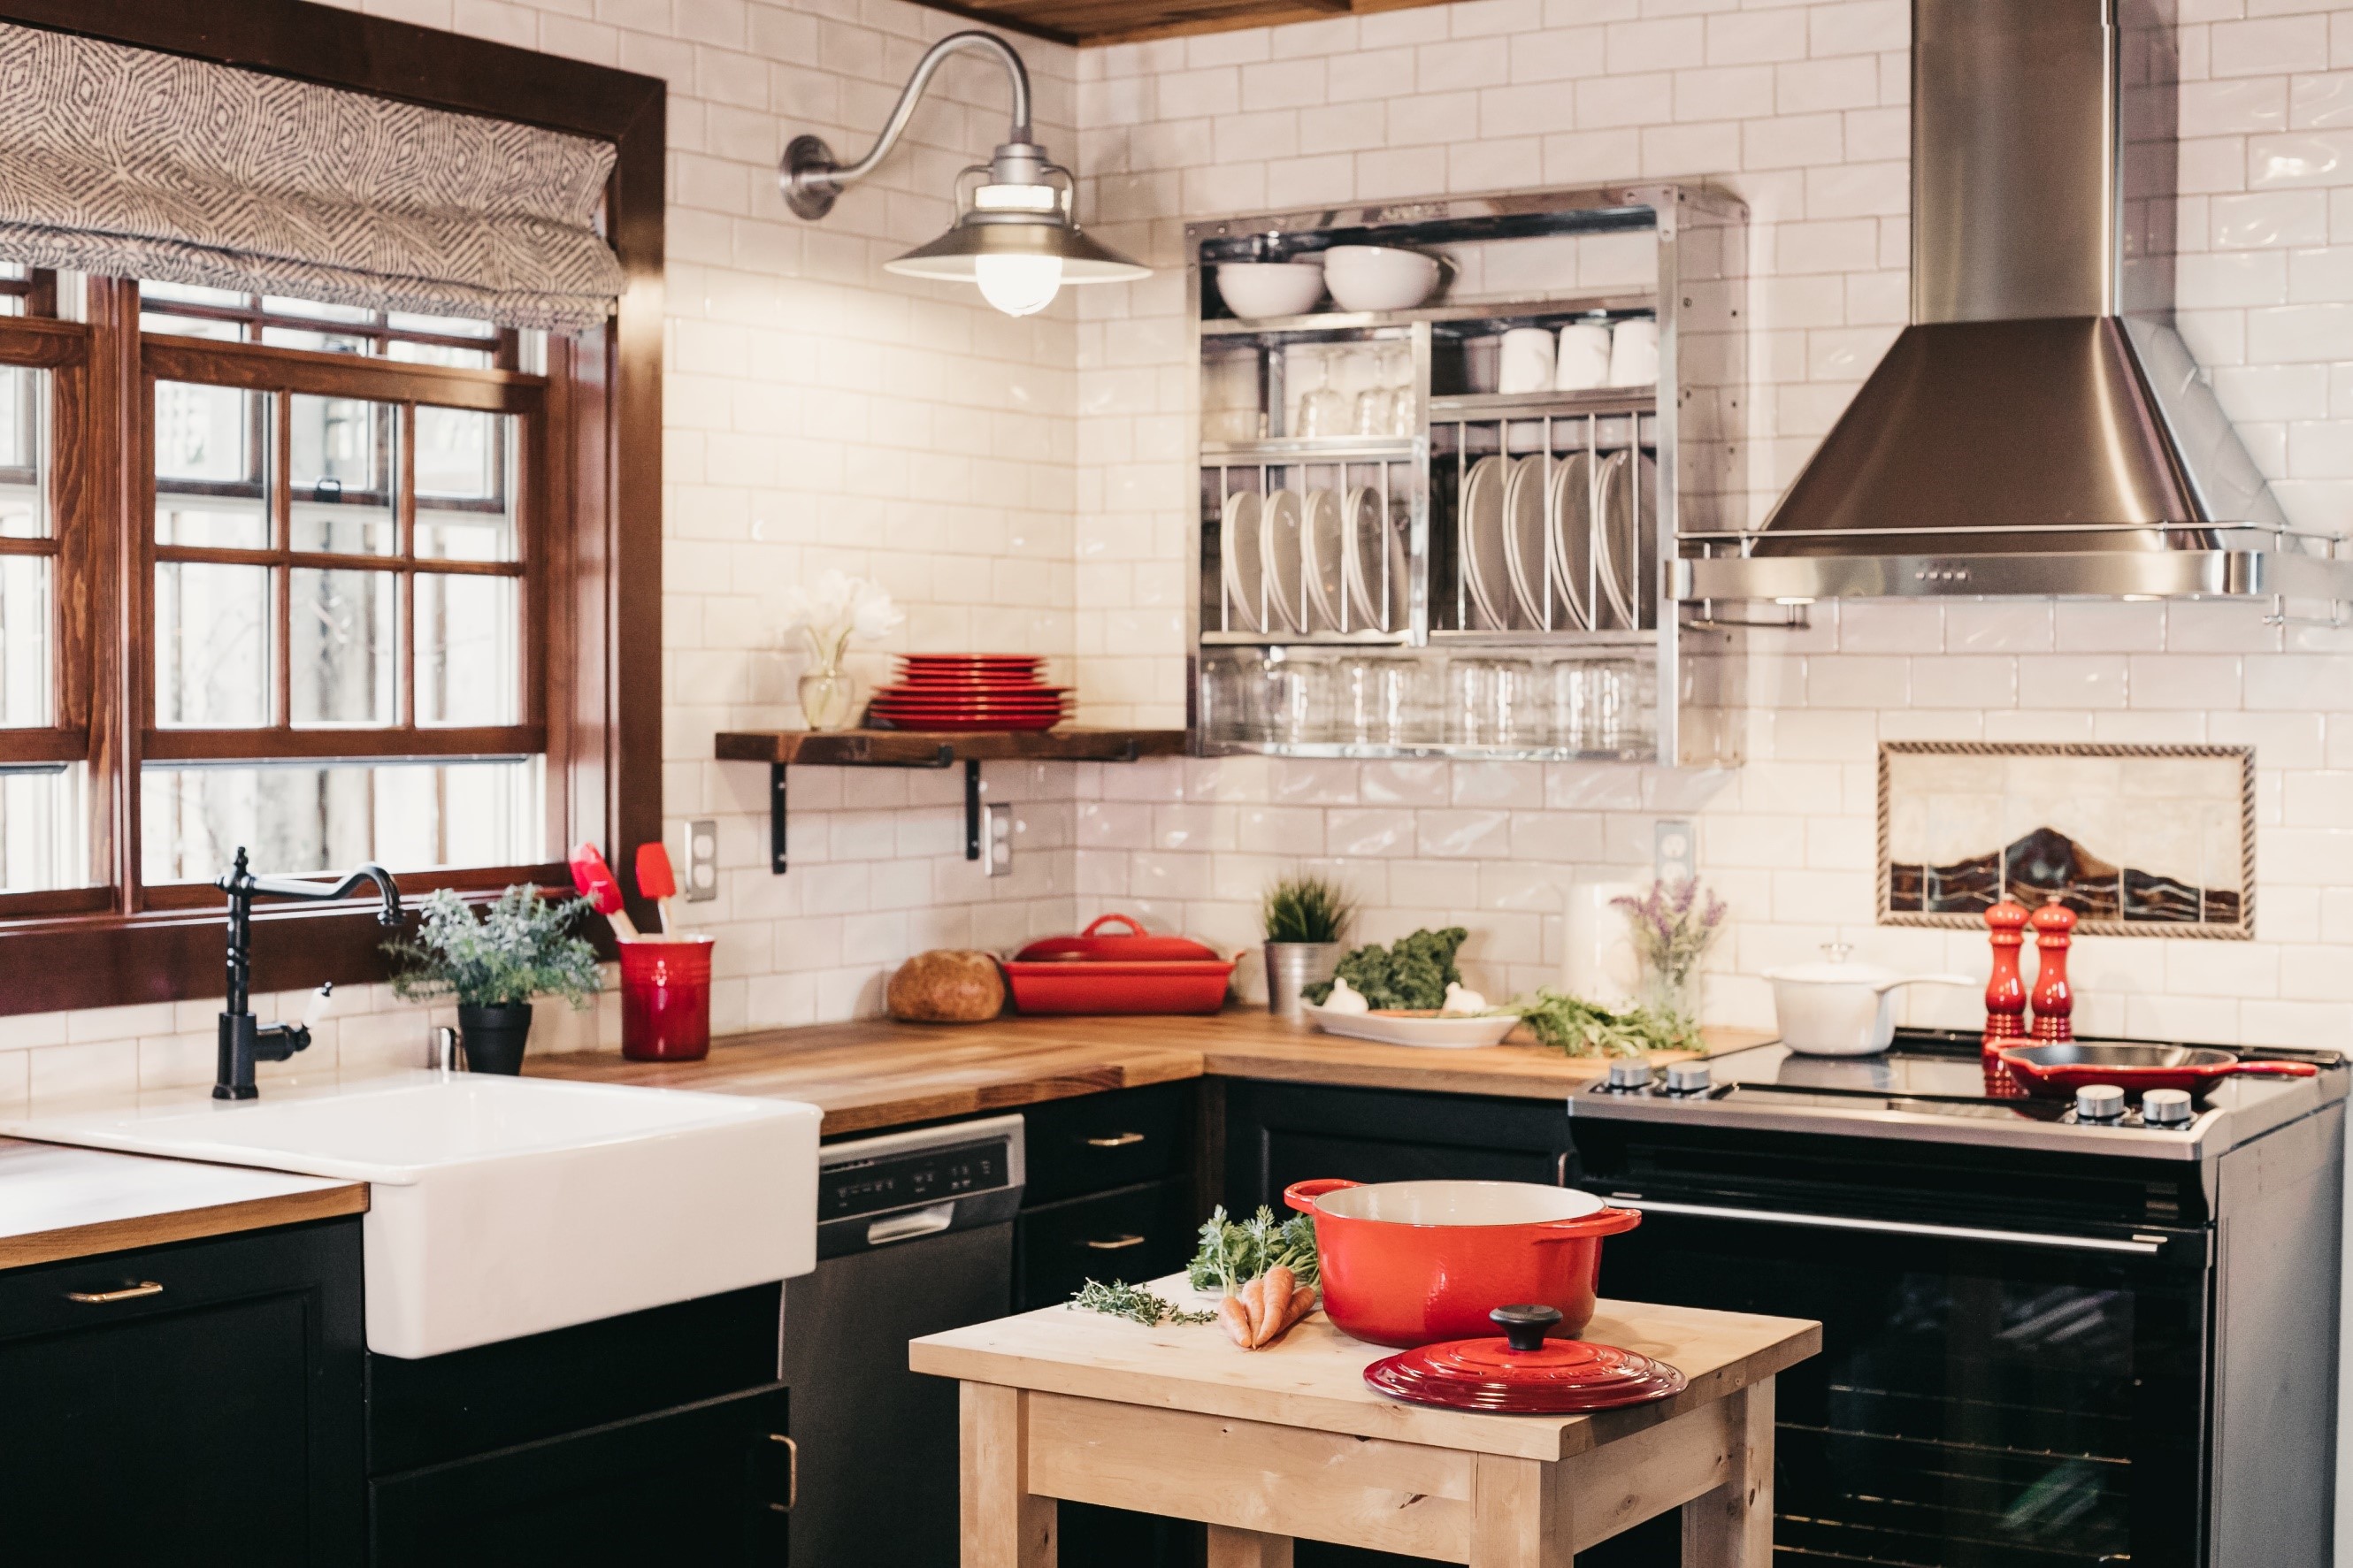 What to Know About Your Kitchen’s Oven, Stove & Cooktop Range – Plus! What’s Covered by Your Home Warranty